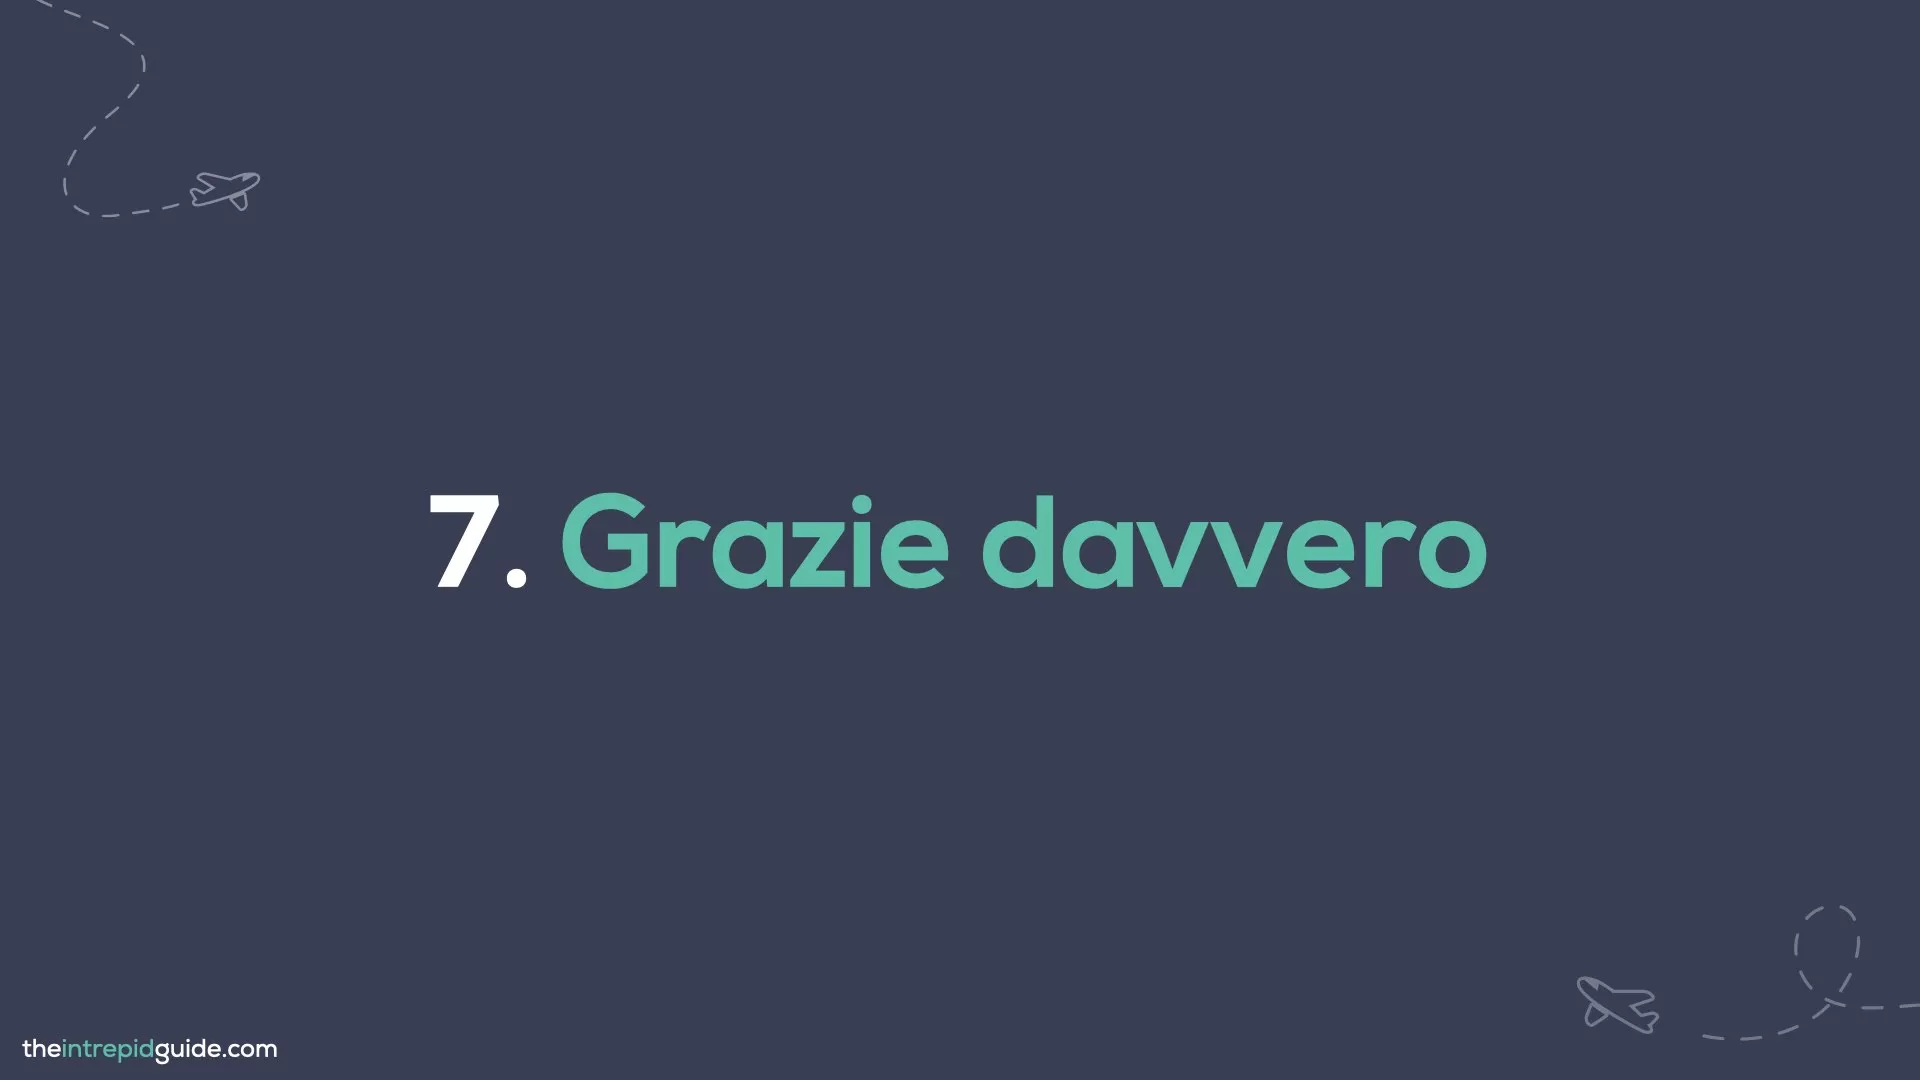 How to say thank you in Italian - Grazie davvero